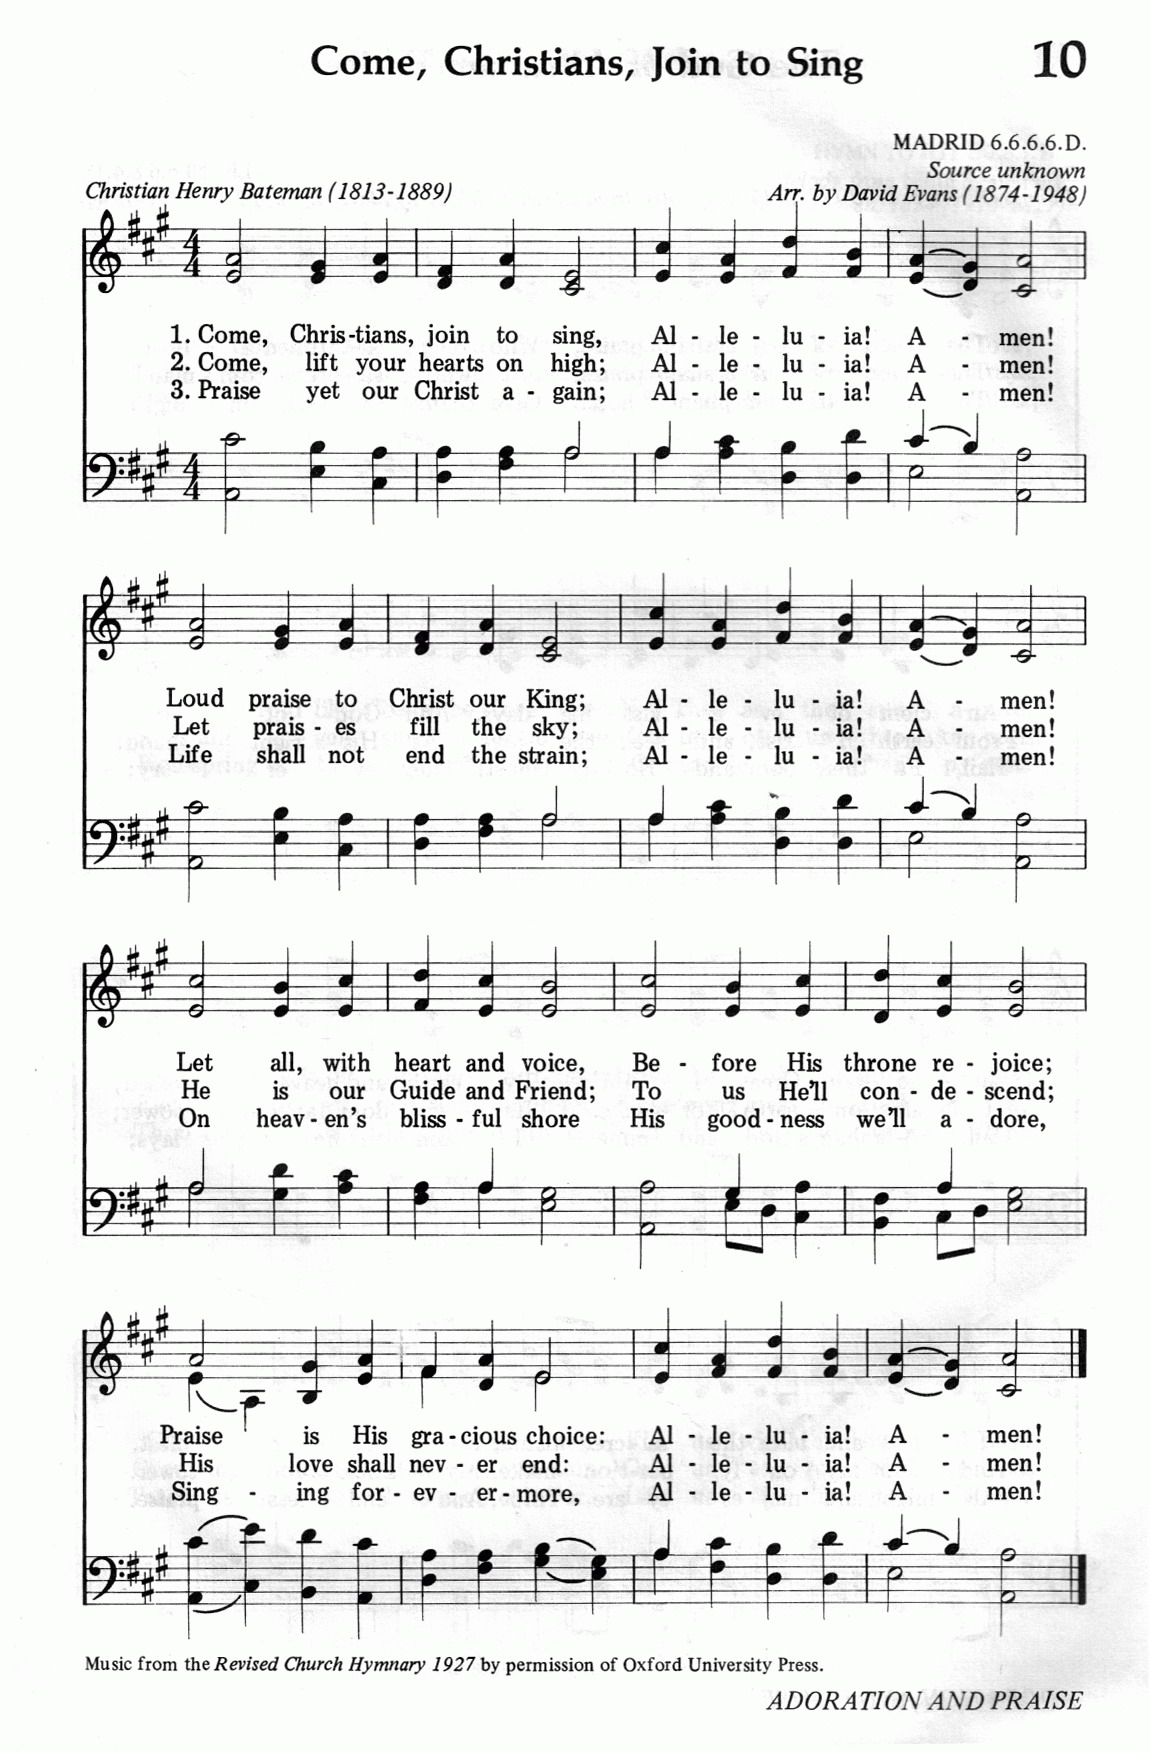 010.Come, Christians, Join to Sing-695HYMN